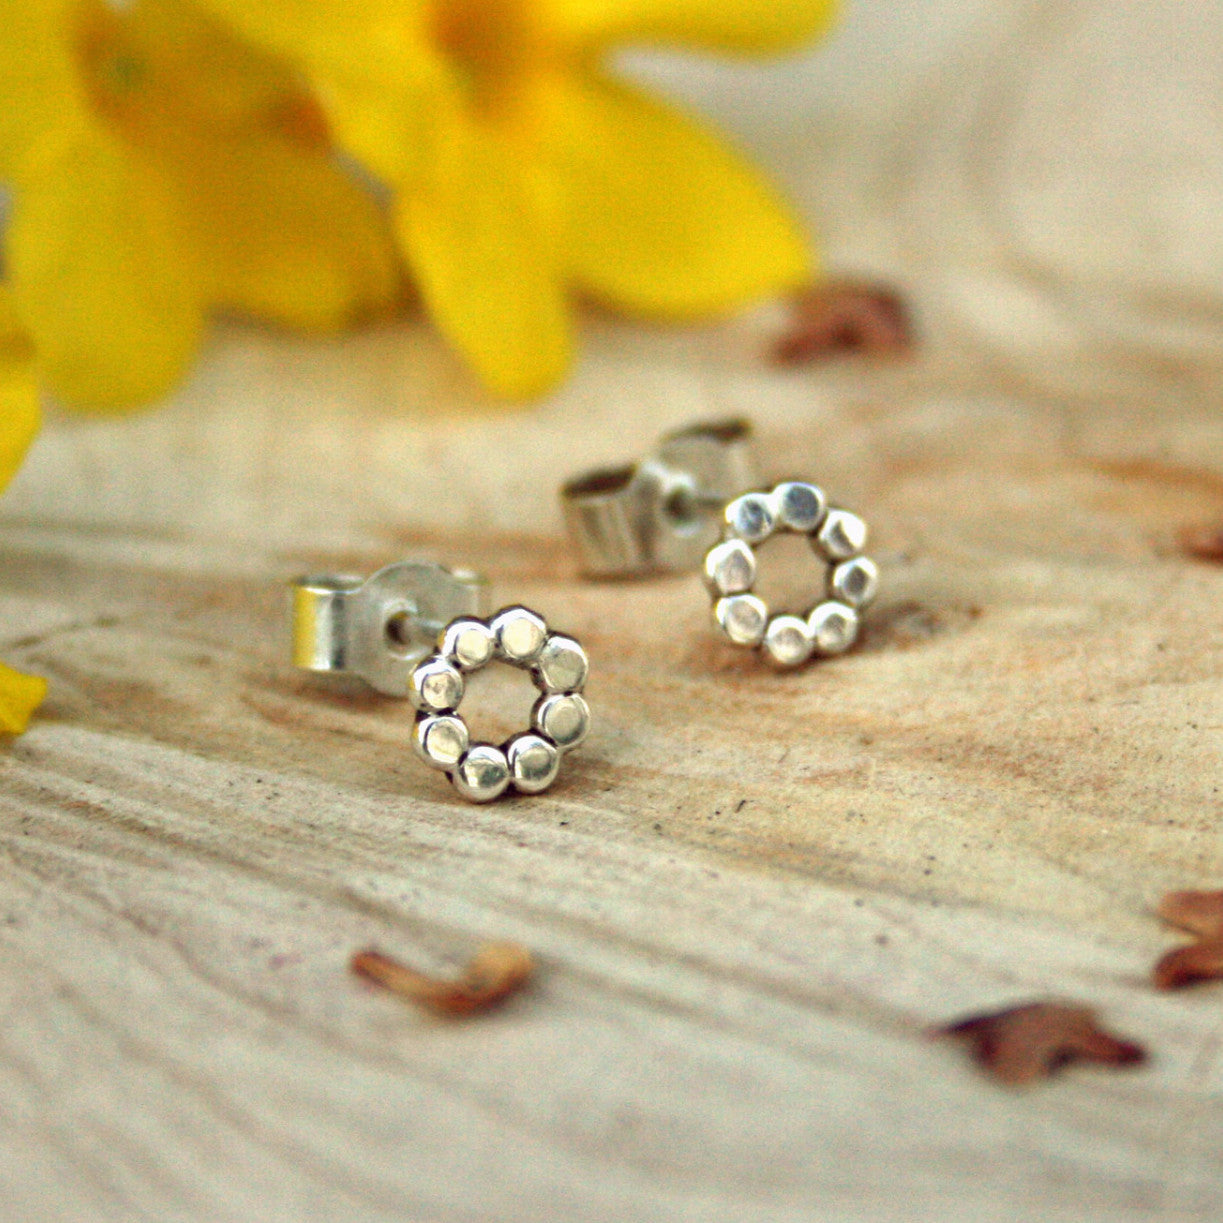 Silver Flower Stud Earrings - Curious Magpie Jewellery - 1